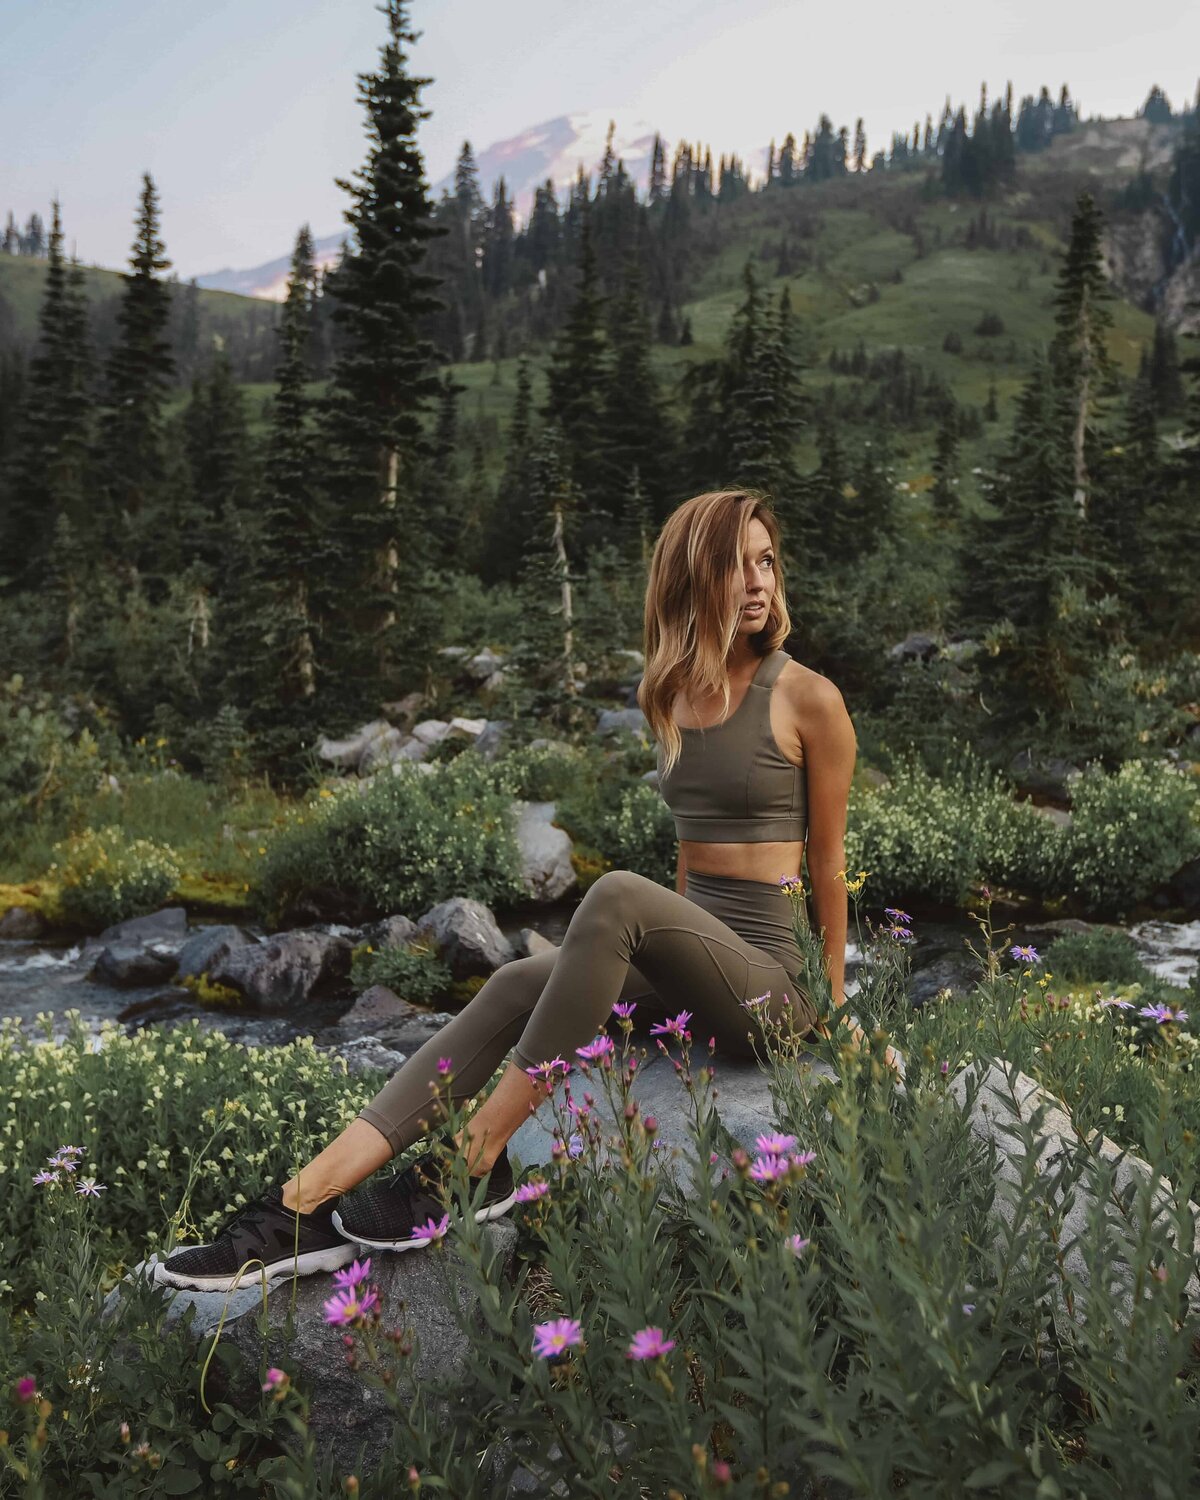 Jess of Jess Wandering wearing brown Glyder Apparel outfit sitting on a rock by wildflowers and trees